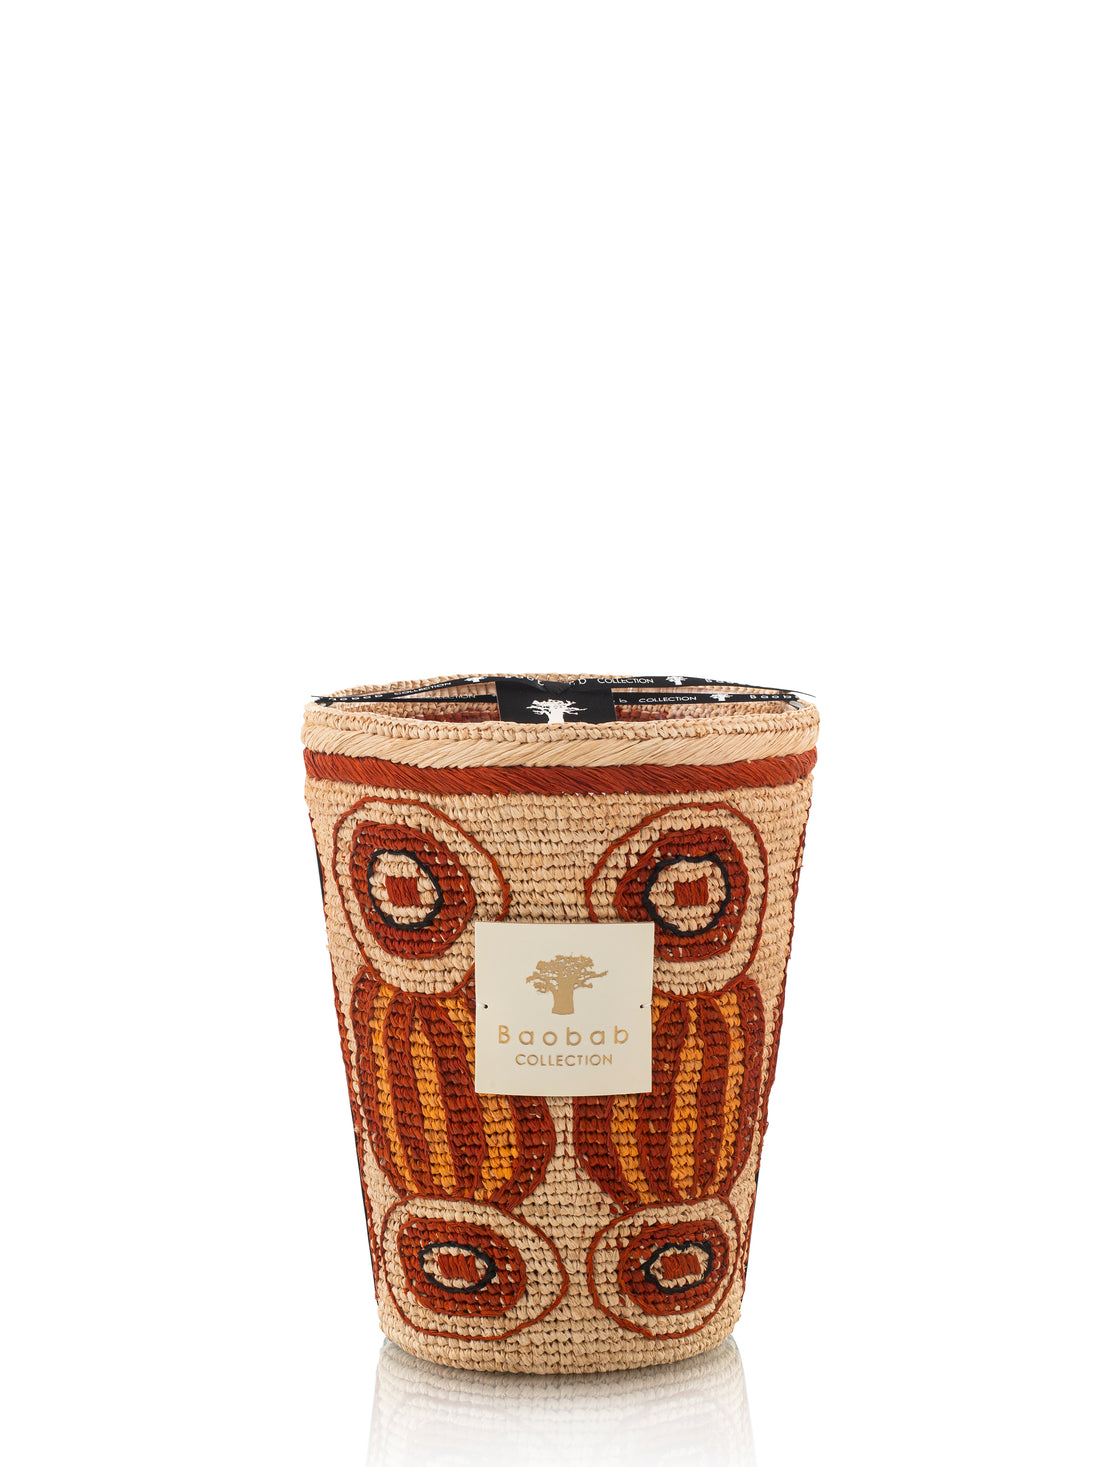 SCENTED CANDLE DOANY ALASORA - Baobab Collection